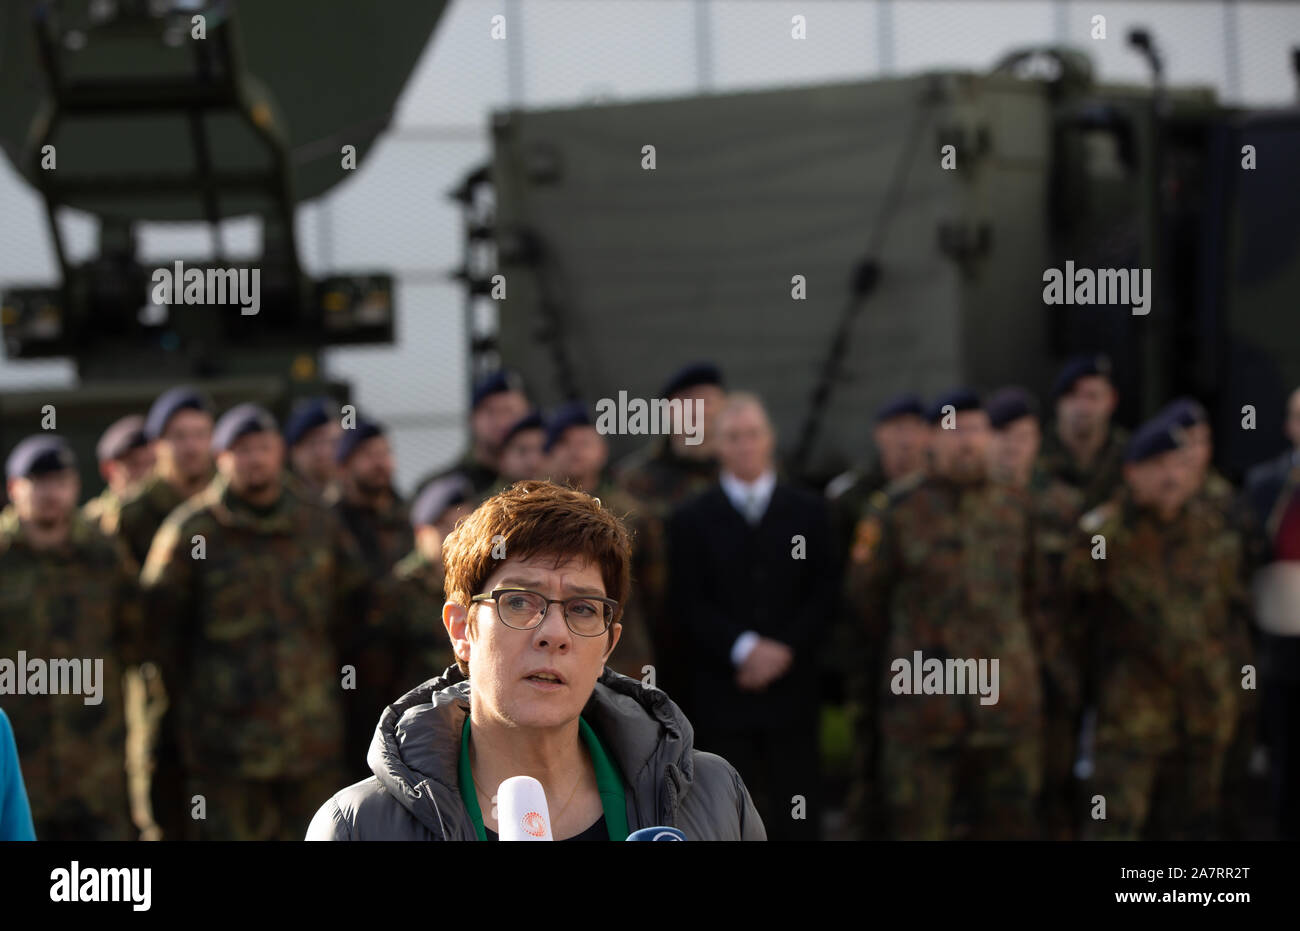 Rheinbach, Germany, 04.11.2019: The Federal Minister of Defence, Annegret Kramp-Karrenbauer, visits the military organisation Cyber and Information Space (CIR) in the Tomburg Barracks. Stock Photo